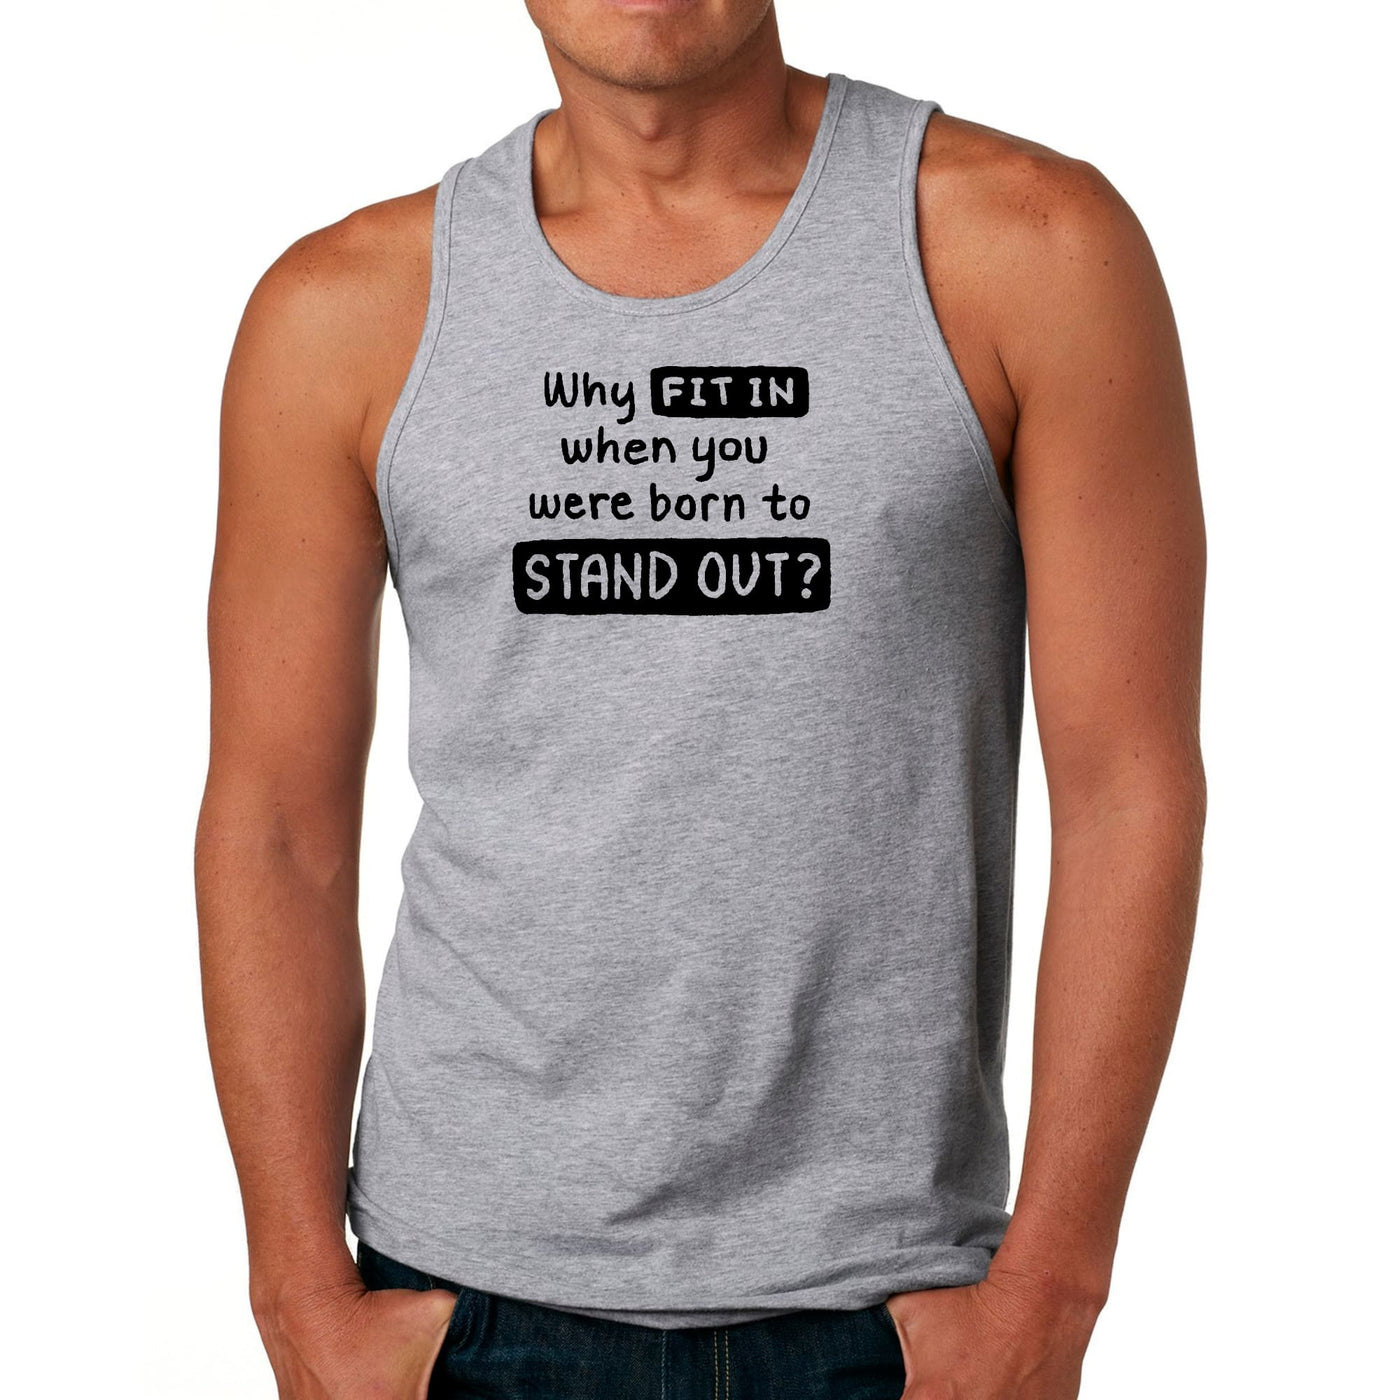 Mens Fitness Tank Top Graphic T-shirt Why Fit In When You Were Born - Mens